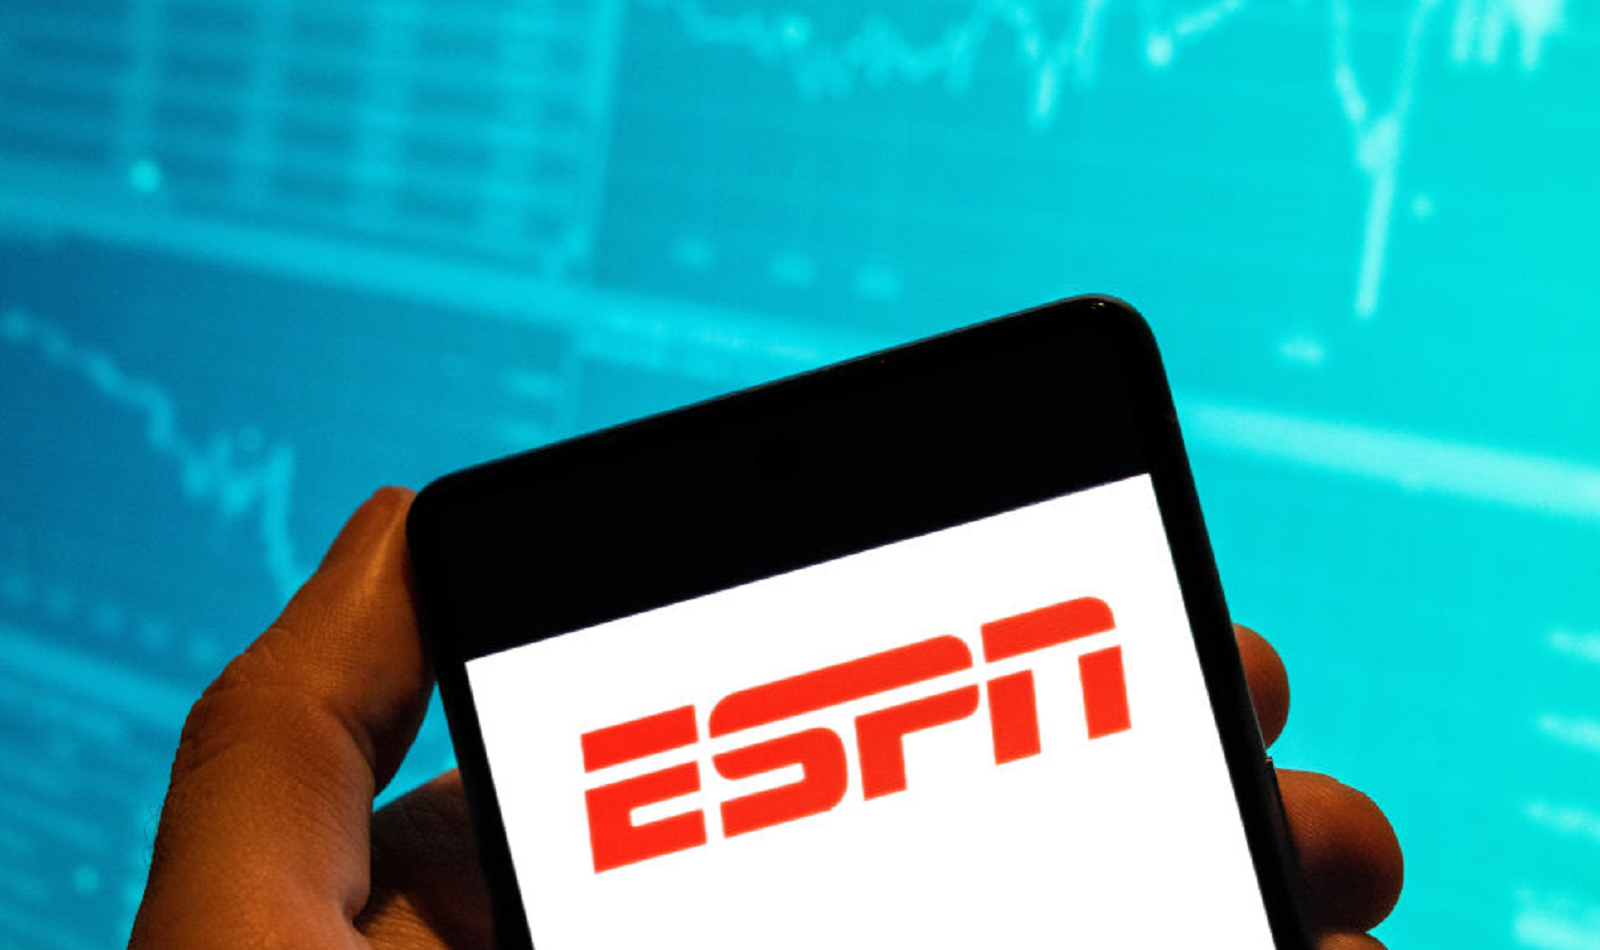 ESPN/Disney Has Stopped Tweeting On All Accounts In Protest Of Elon Musk On Saturday